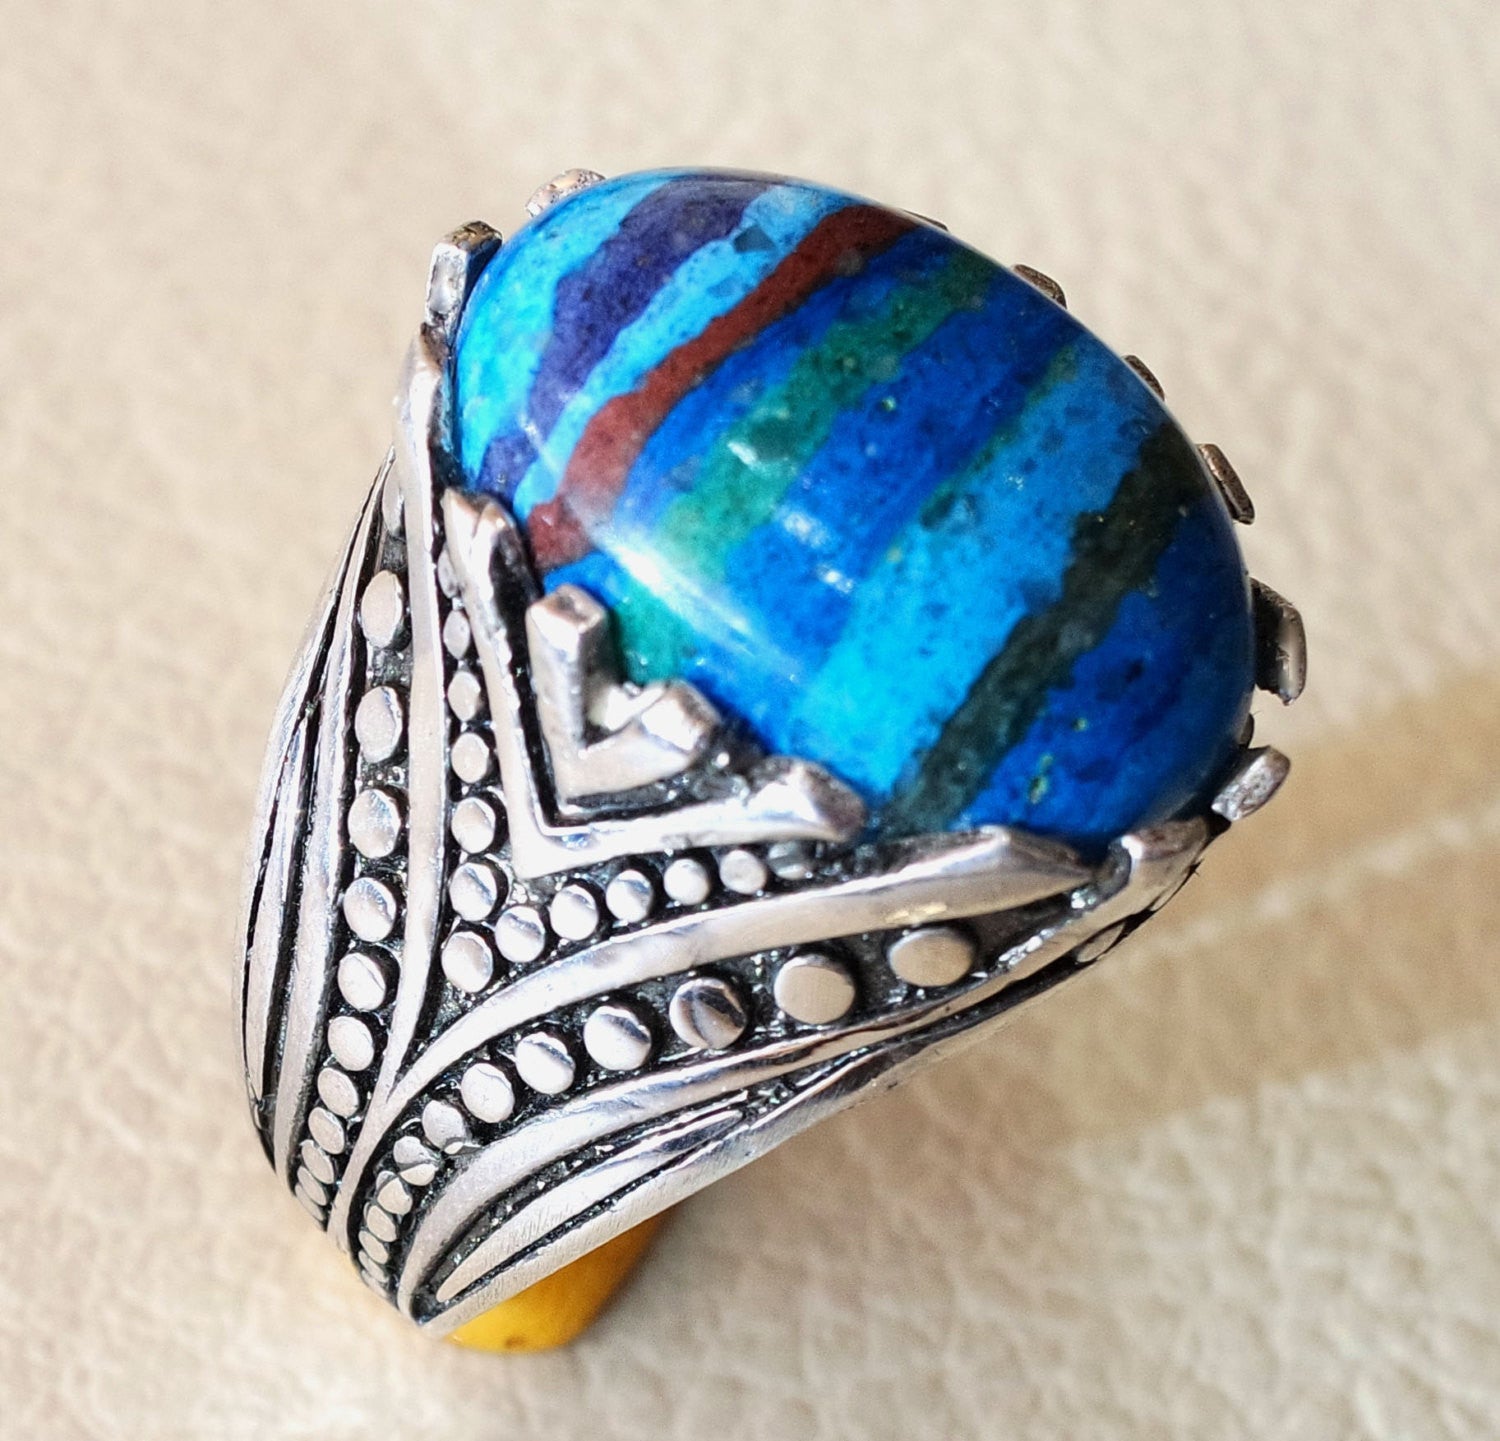 natural rainbow Calsilica colorful semi precious stone sterling silver 925 man ring any size blue red purple light dark high quality gem